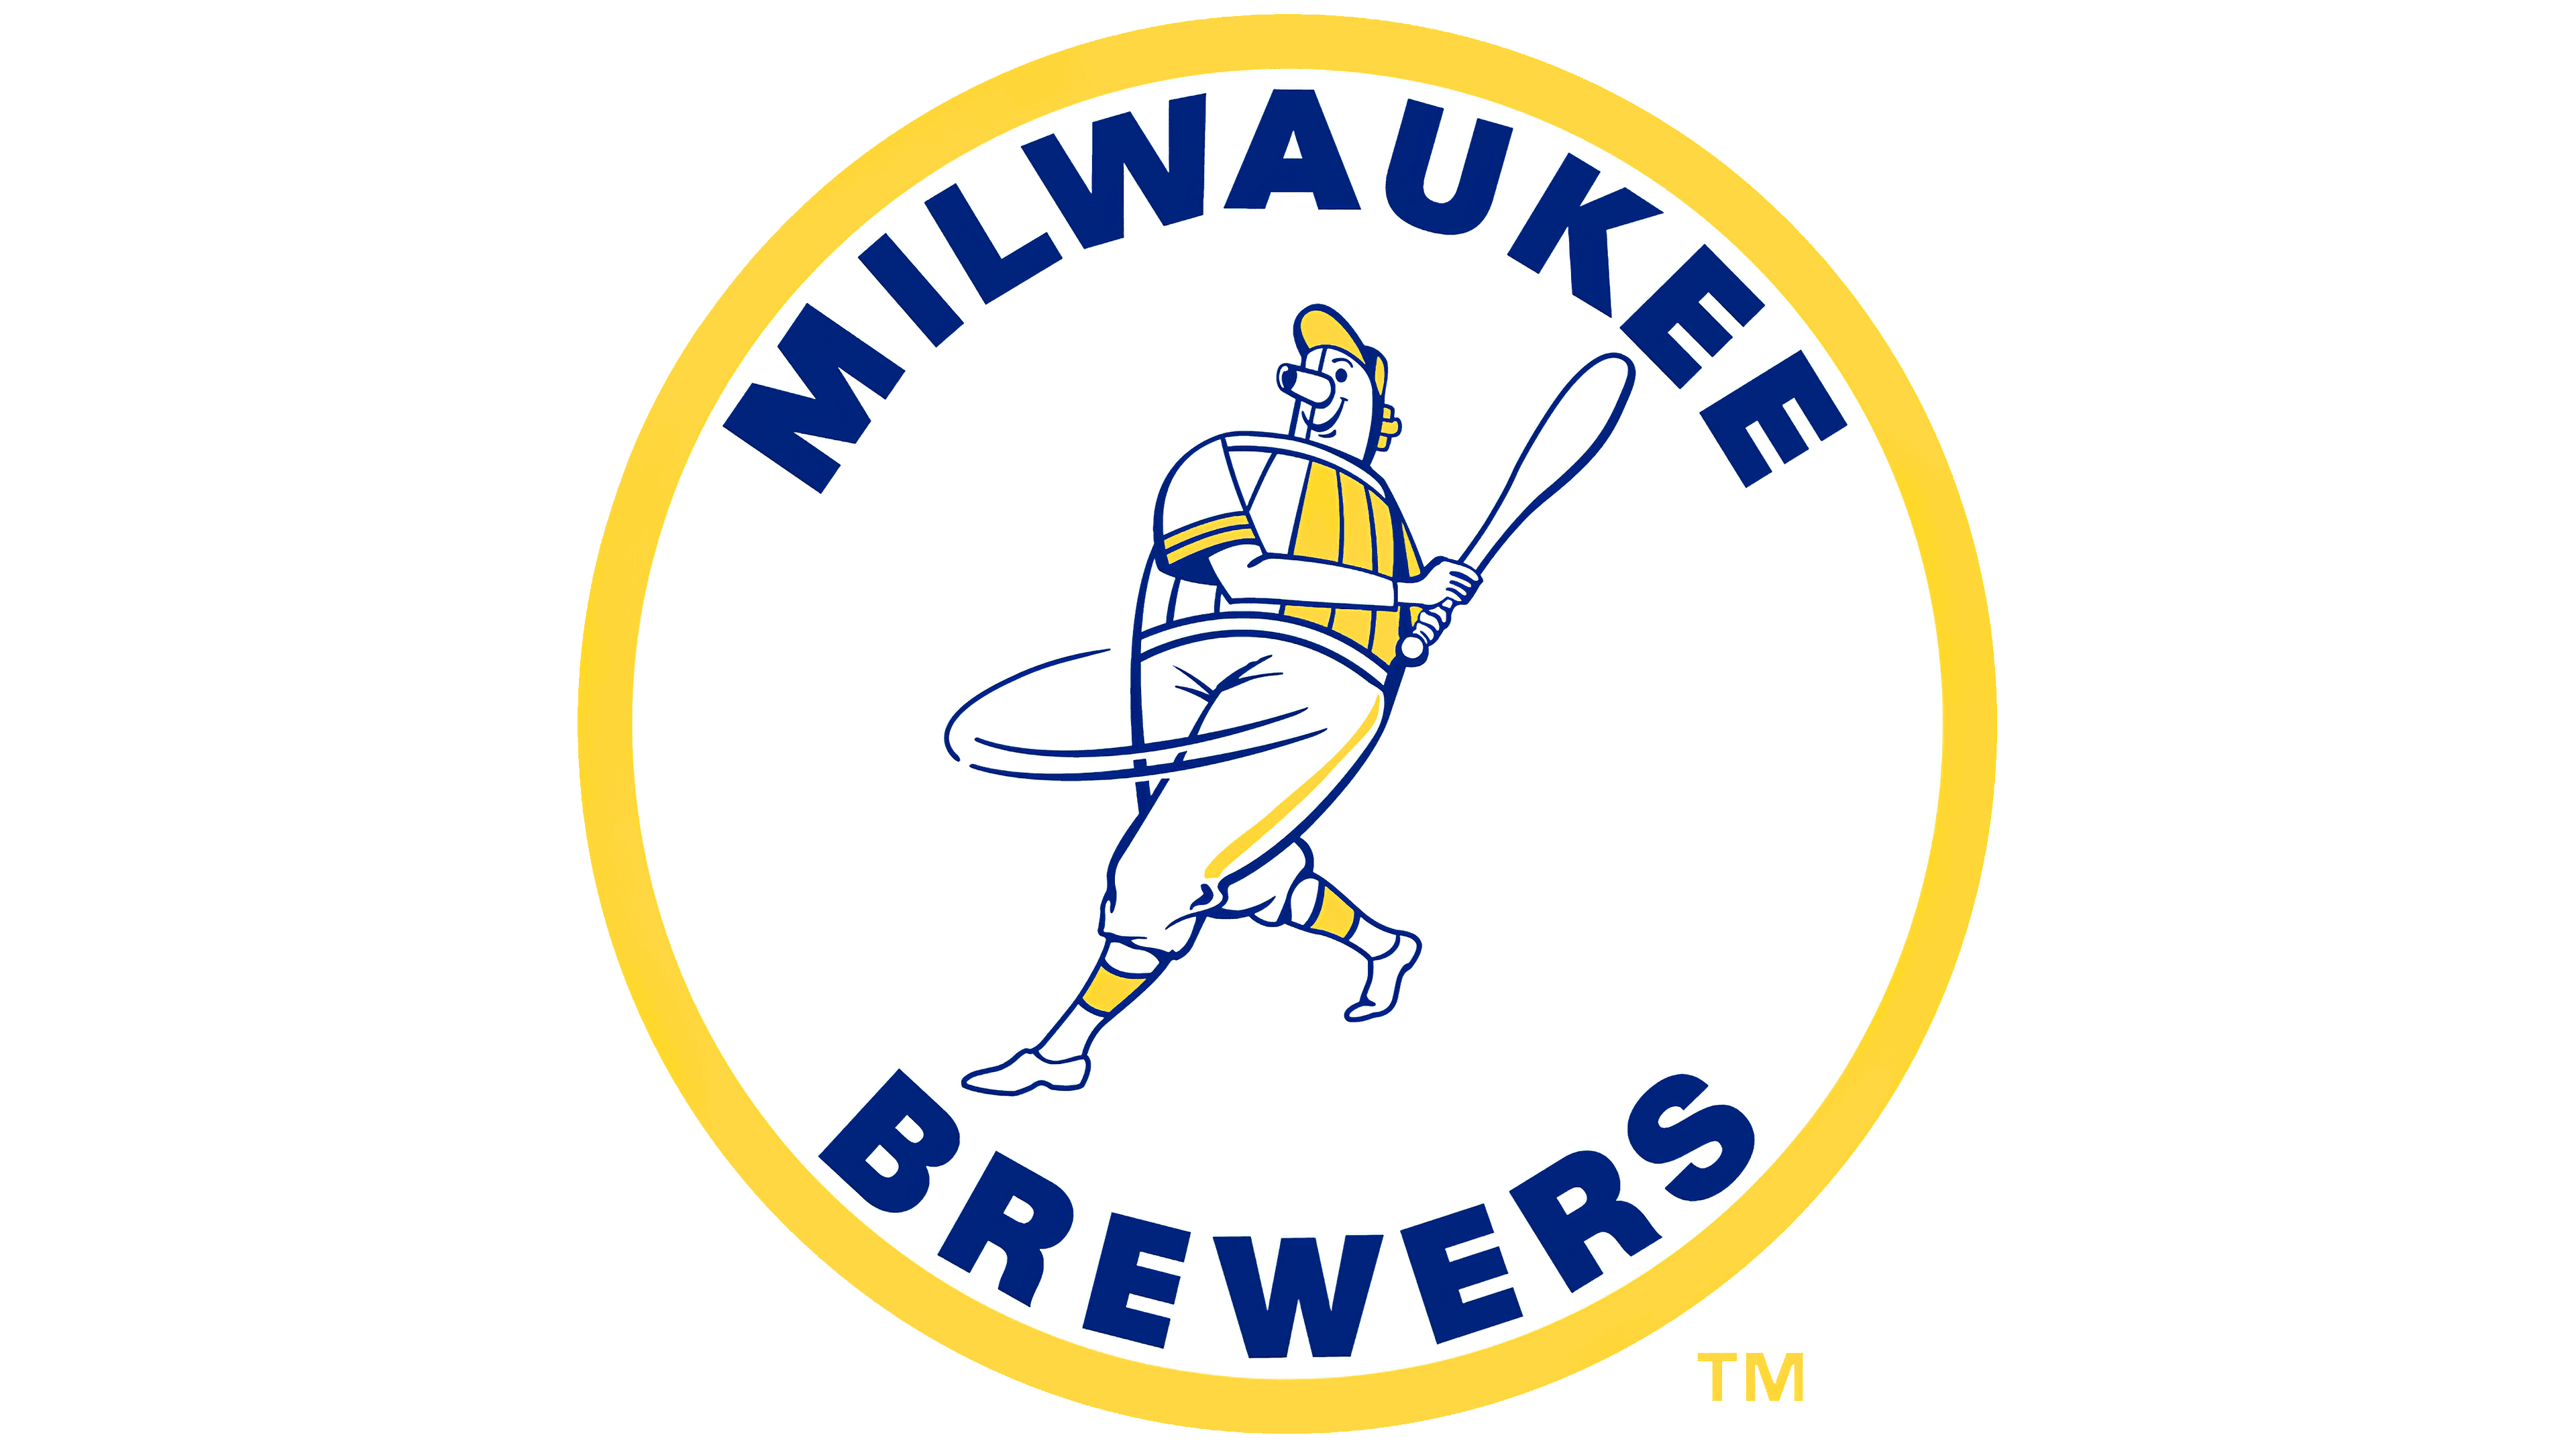 MILWAUKEE, WI - MAY 21: A detail view of a Milwaukee Brewers logo